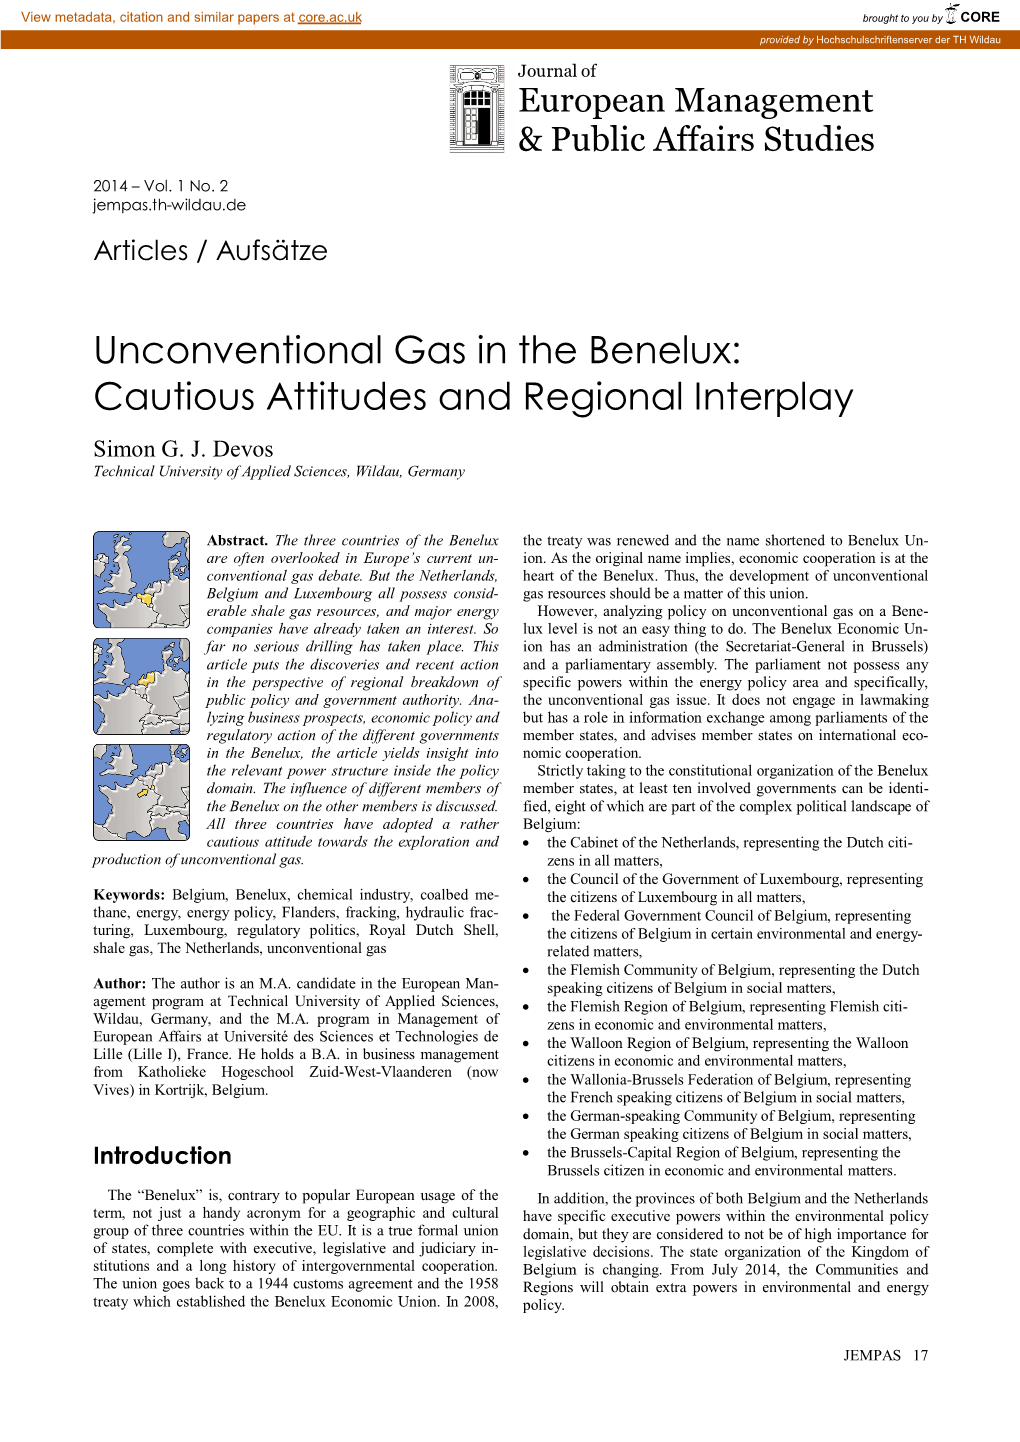 Unconventional Gas in the Benelux: Cautious Attitudes and Regional Interplay Simon G